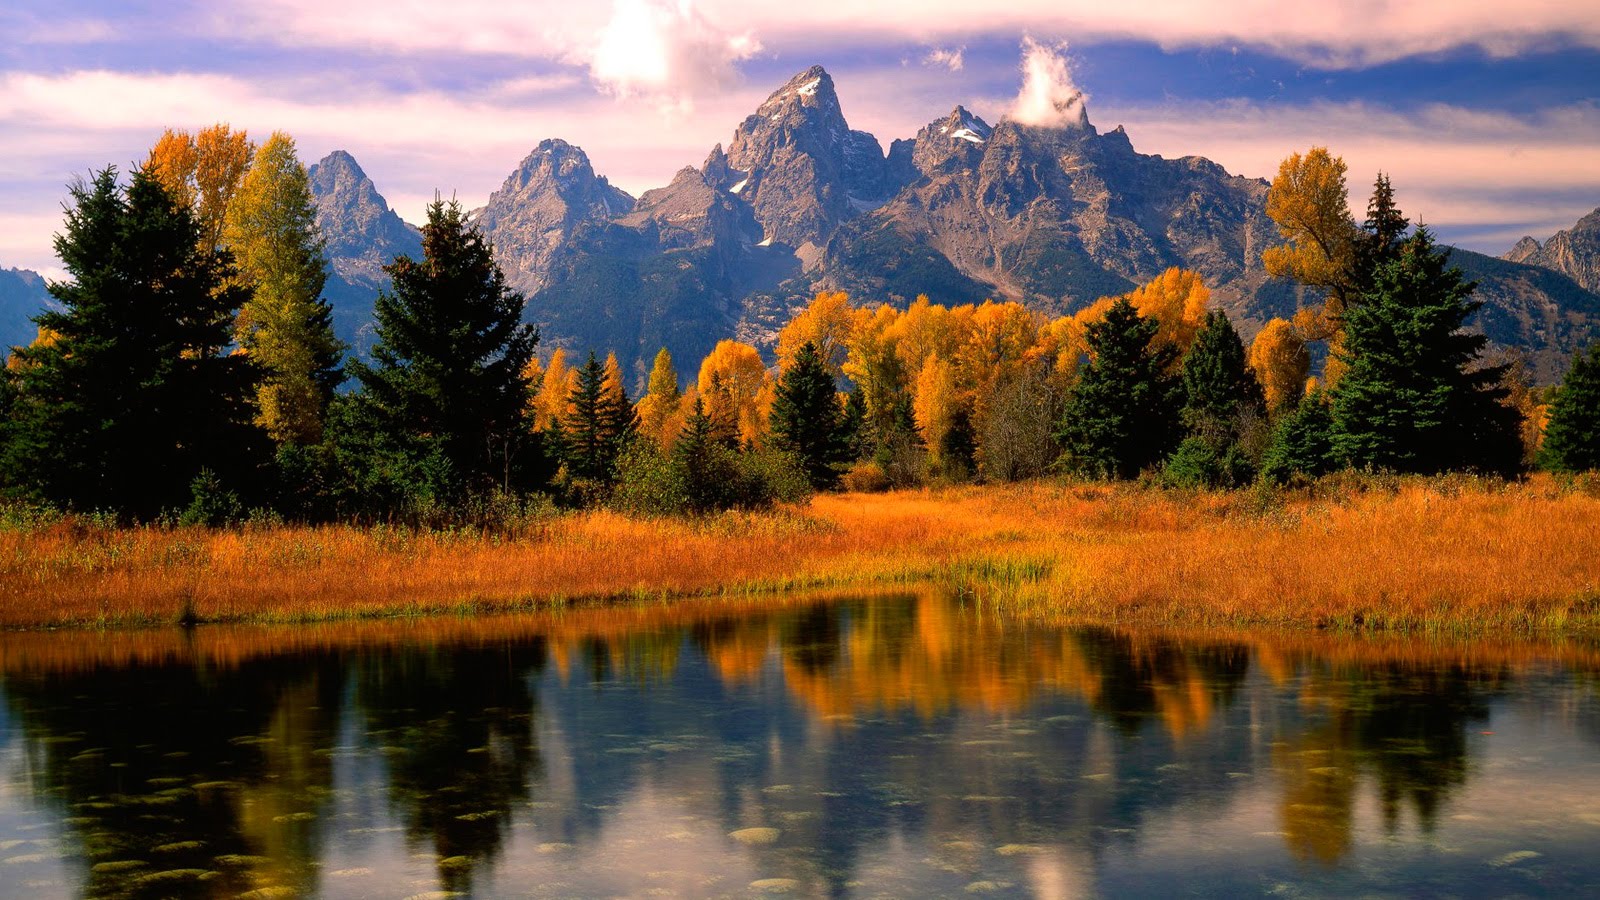 Mountains Wallpapers | mountain Wallpaper | Mountain Pictures |Natural ...